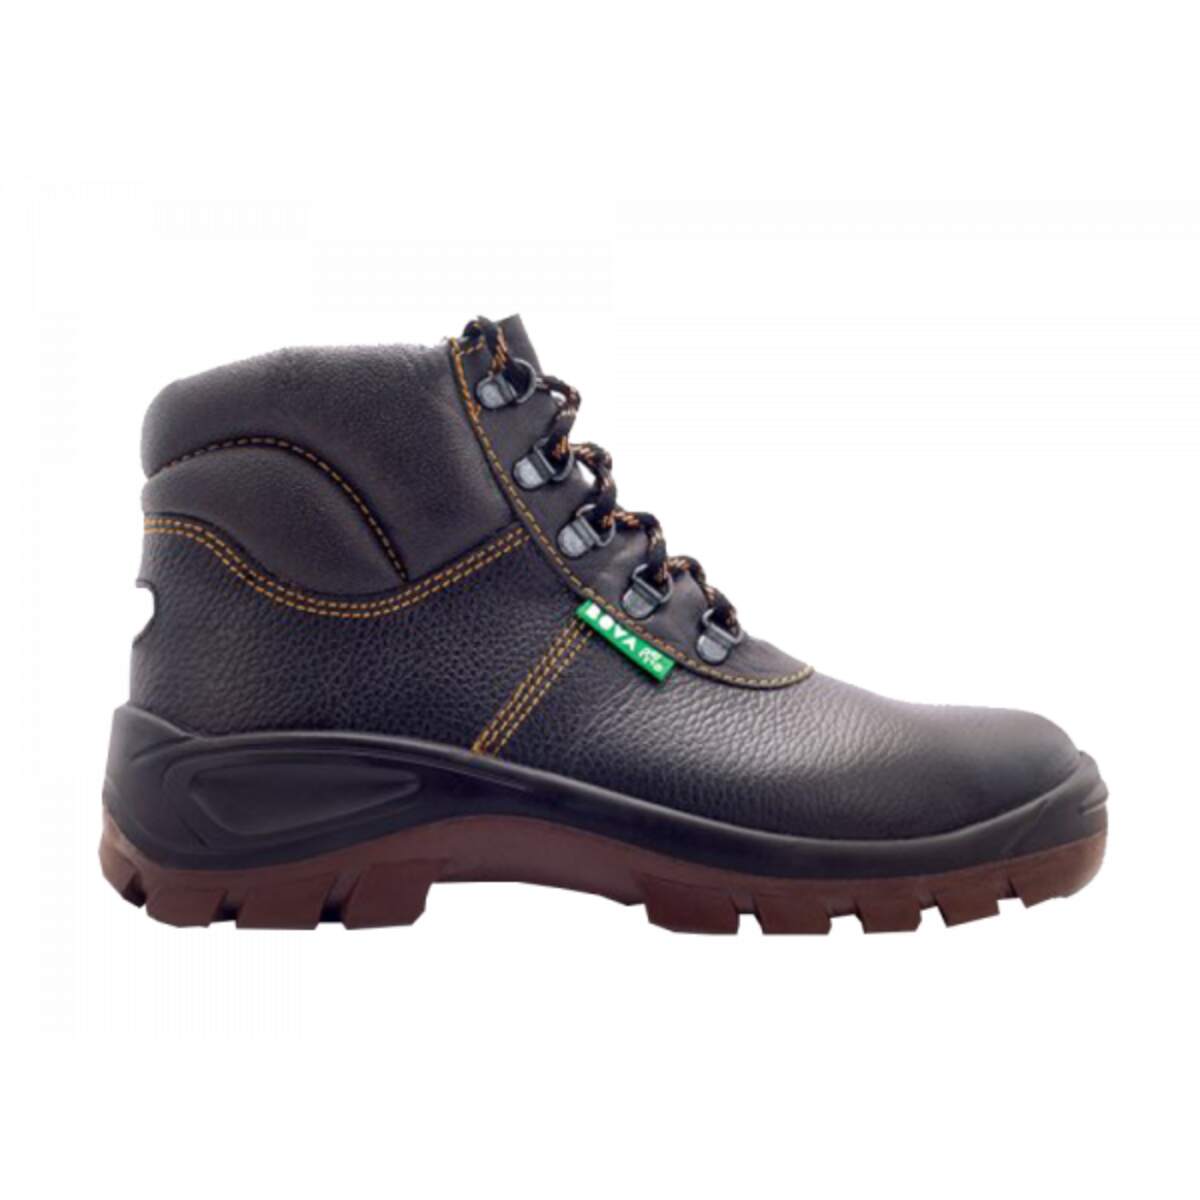 bova neoflex - safety boot by safety equipments supplier - landmark congo sarl